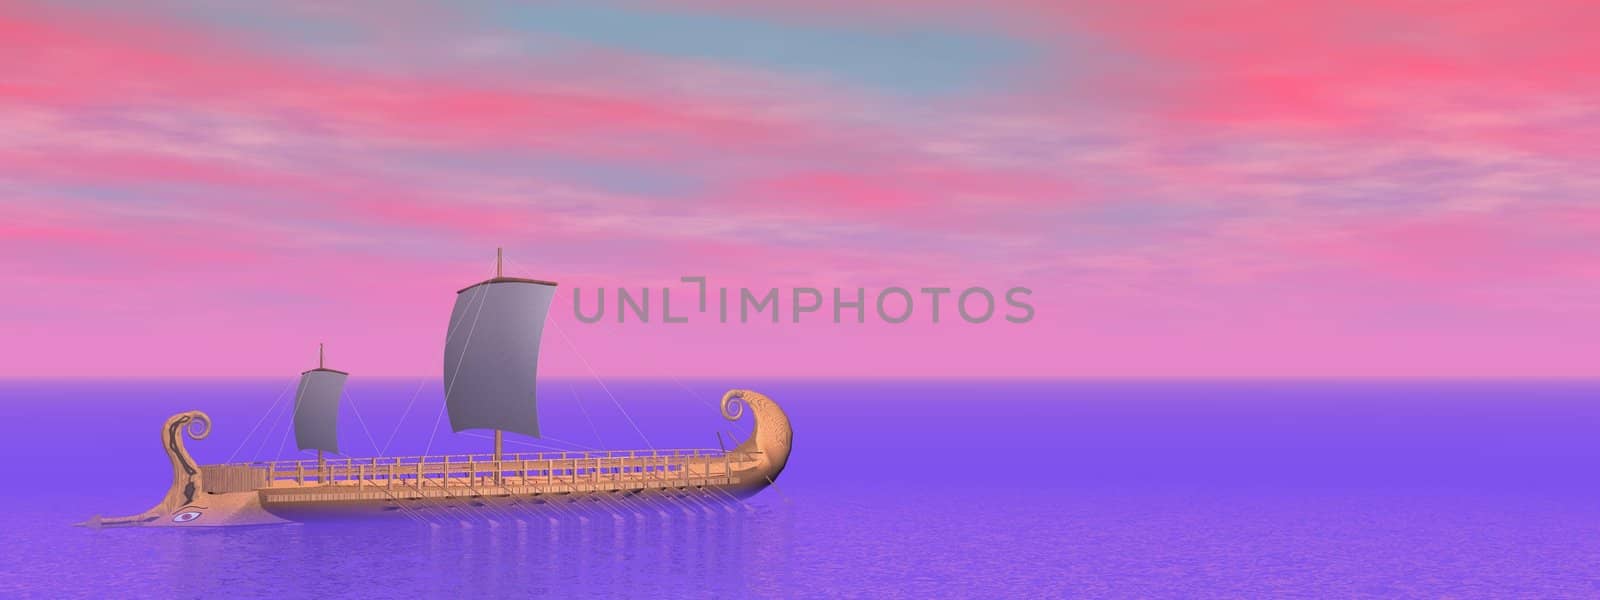 Old greek trireme boat on the ocean by violet and pink sunset sky